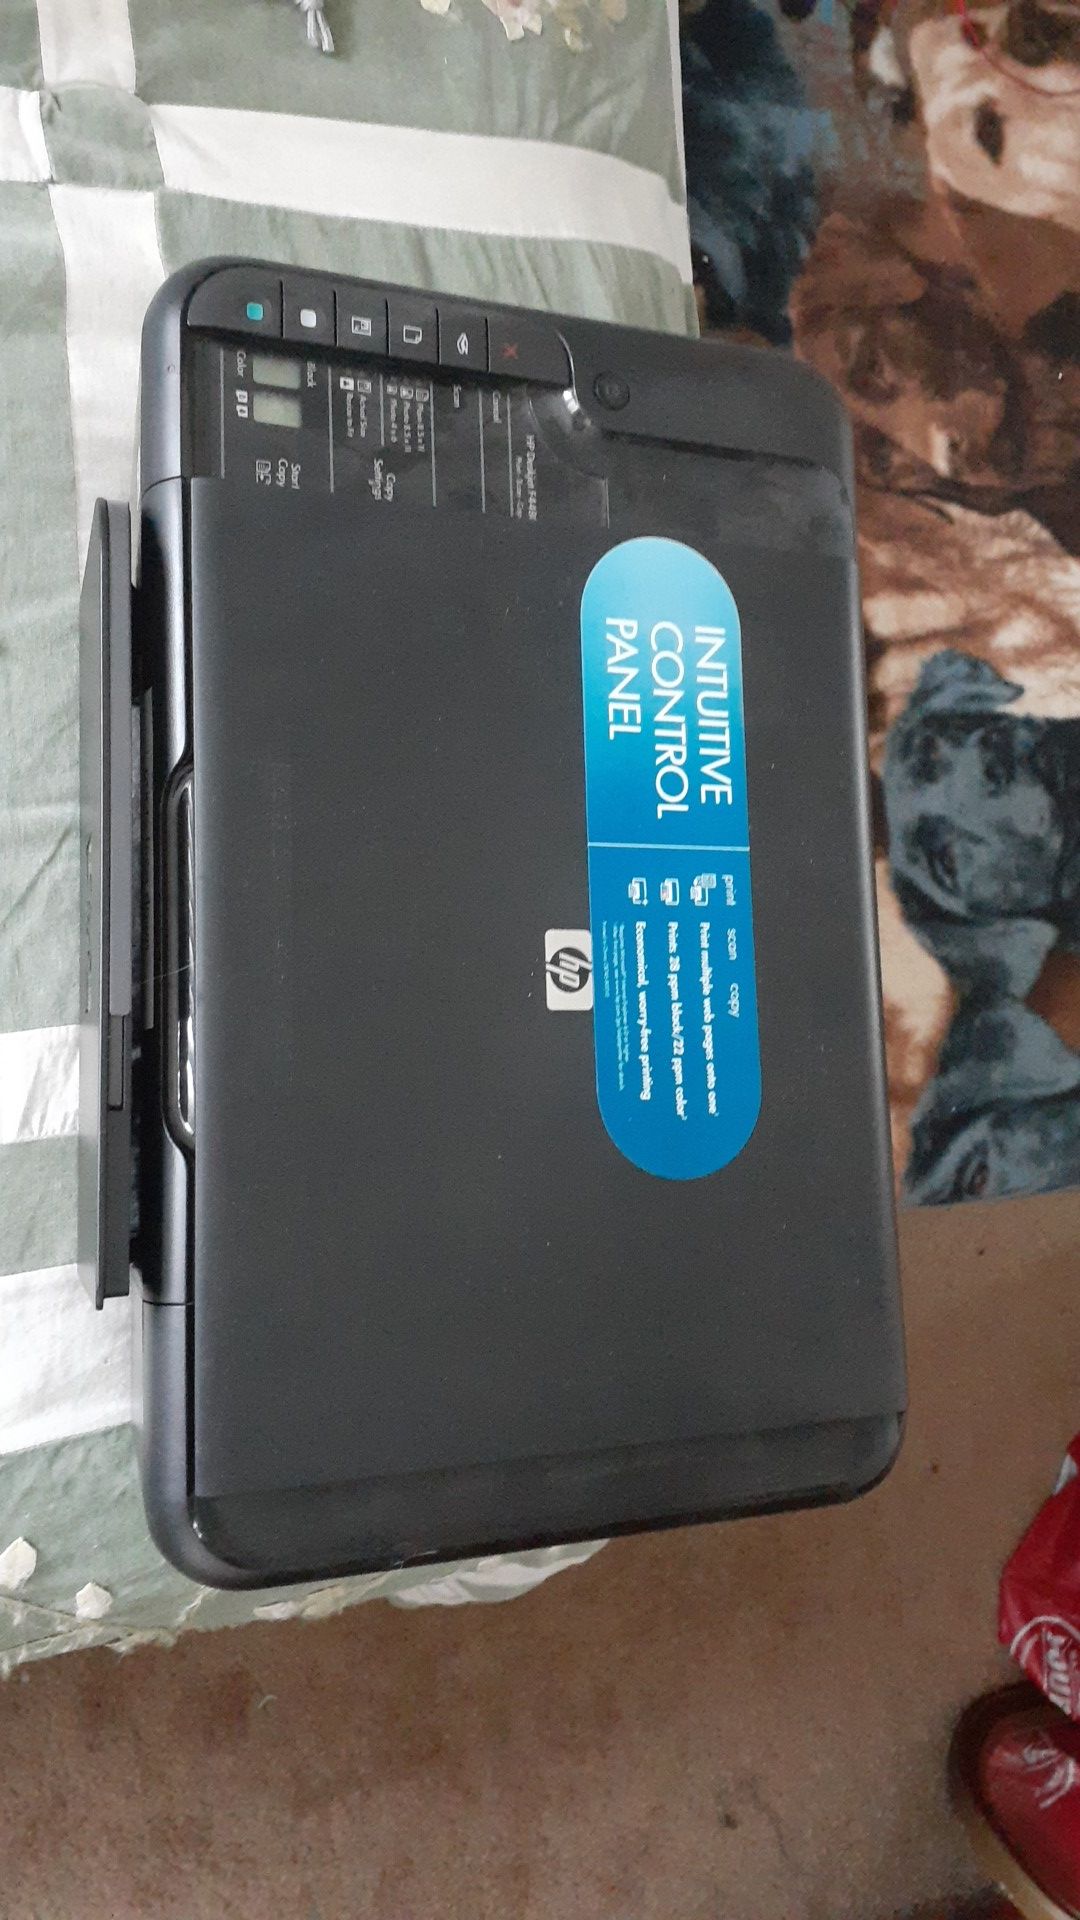 Brand new Hewlett-Packard printer scanner and copier comes with everything ink black and color c d chords everything manual brand new